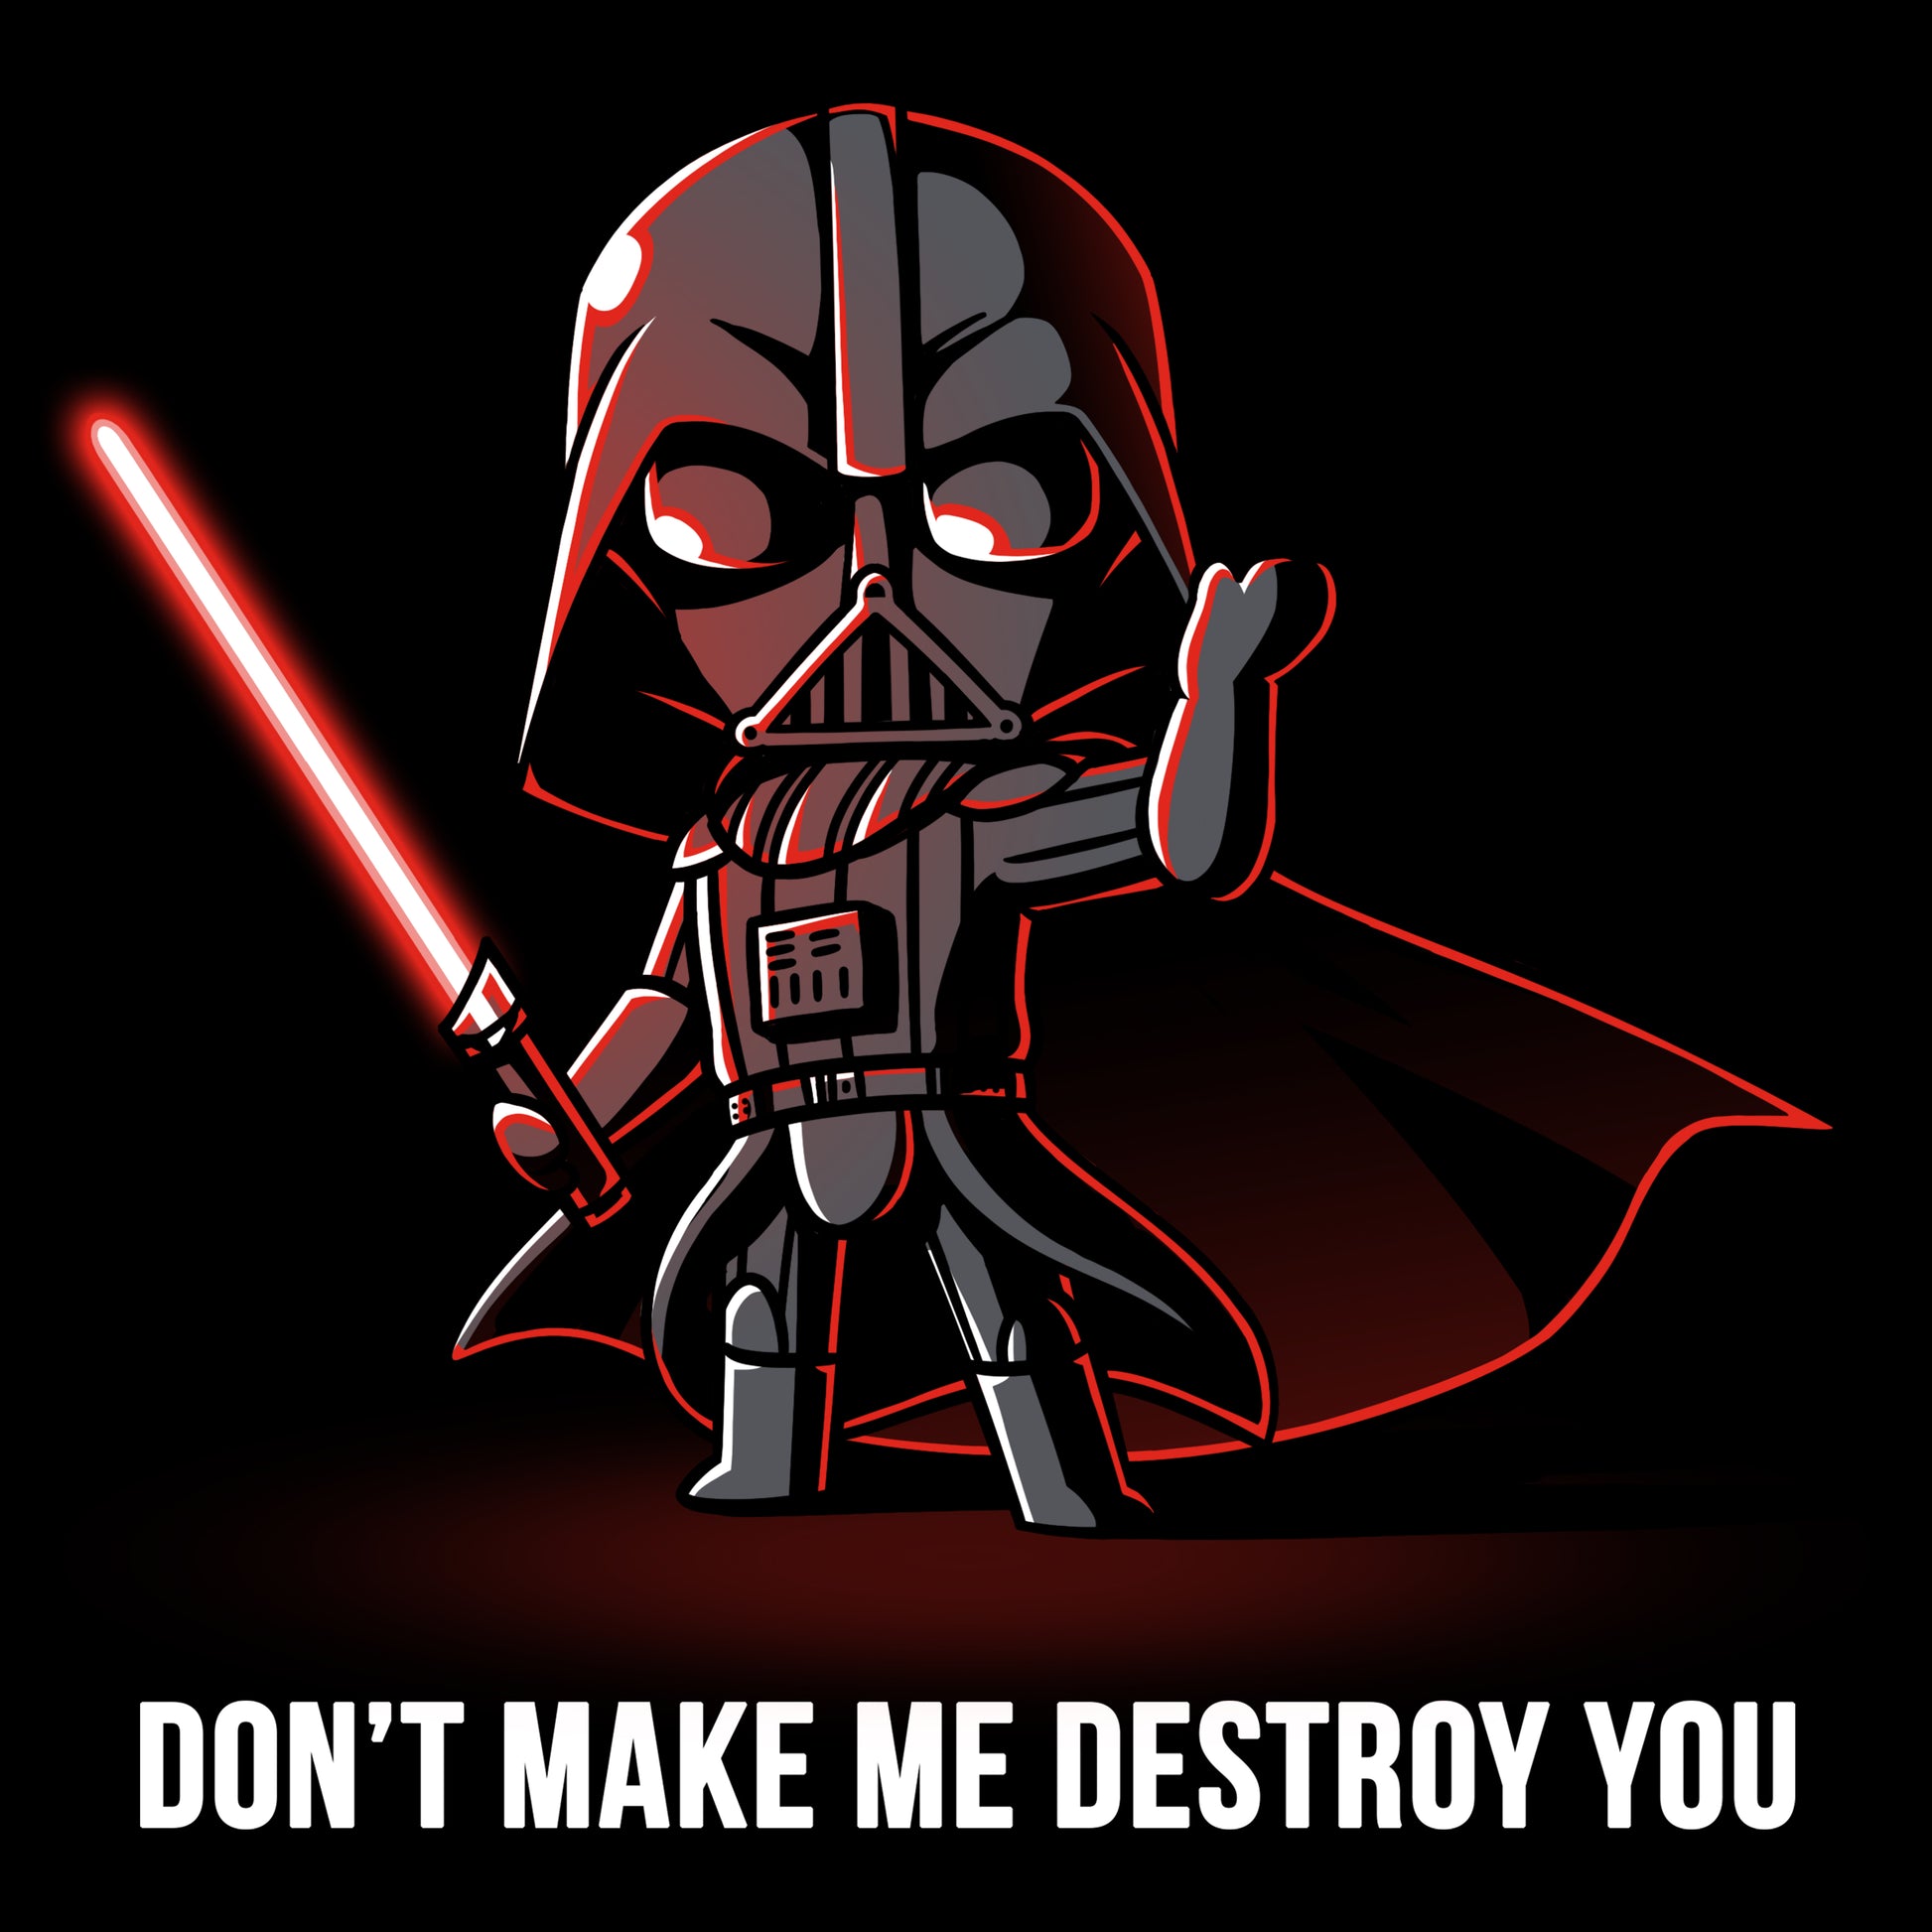 A licensed Star Wars T-shirt featuring Darth Vader with the words "Don't Make Me Destroy You" by Star Wars.